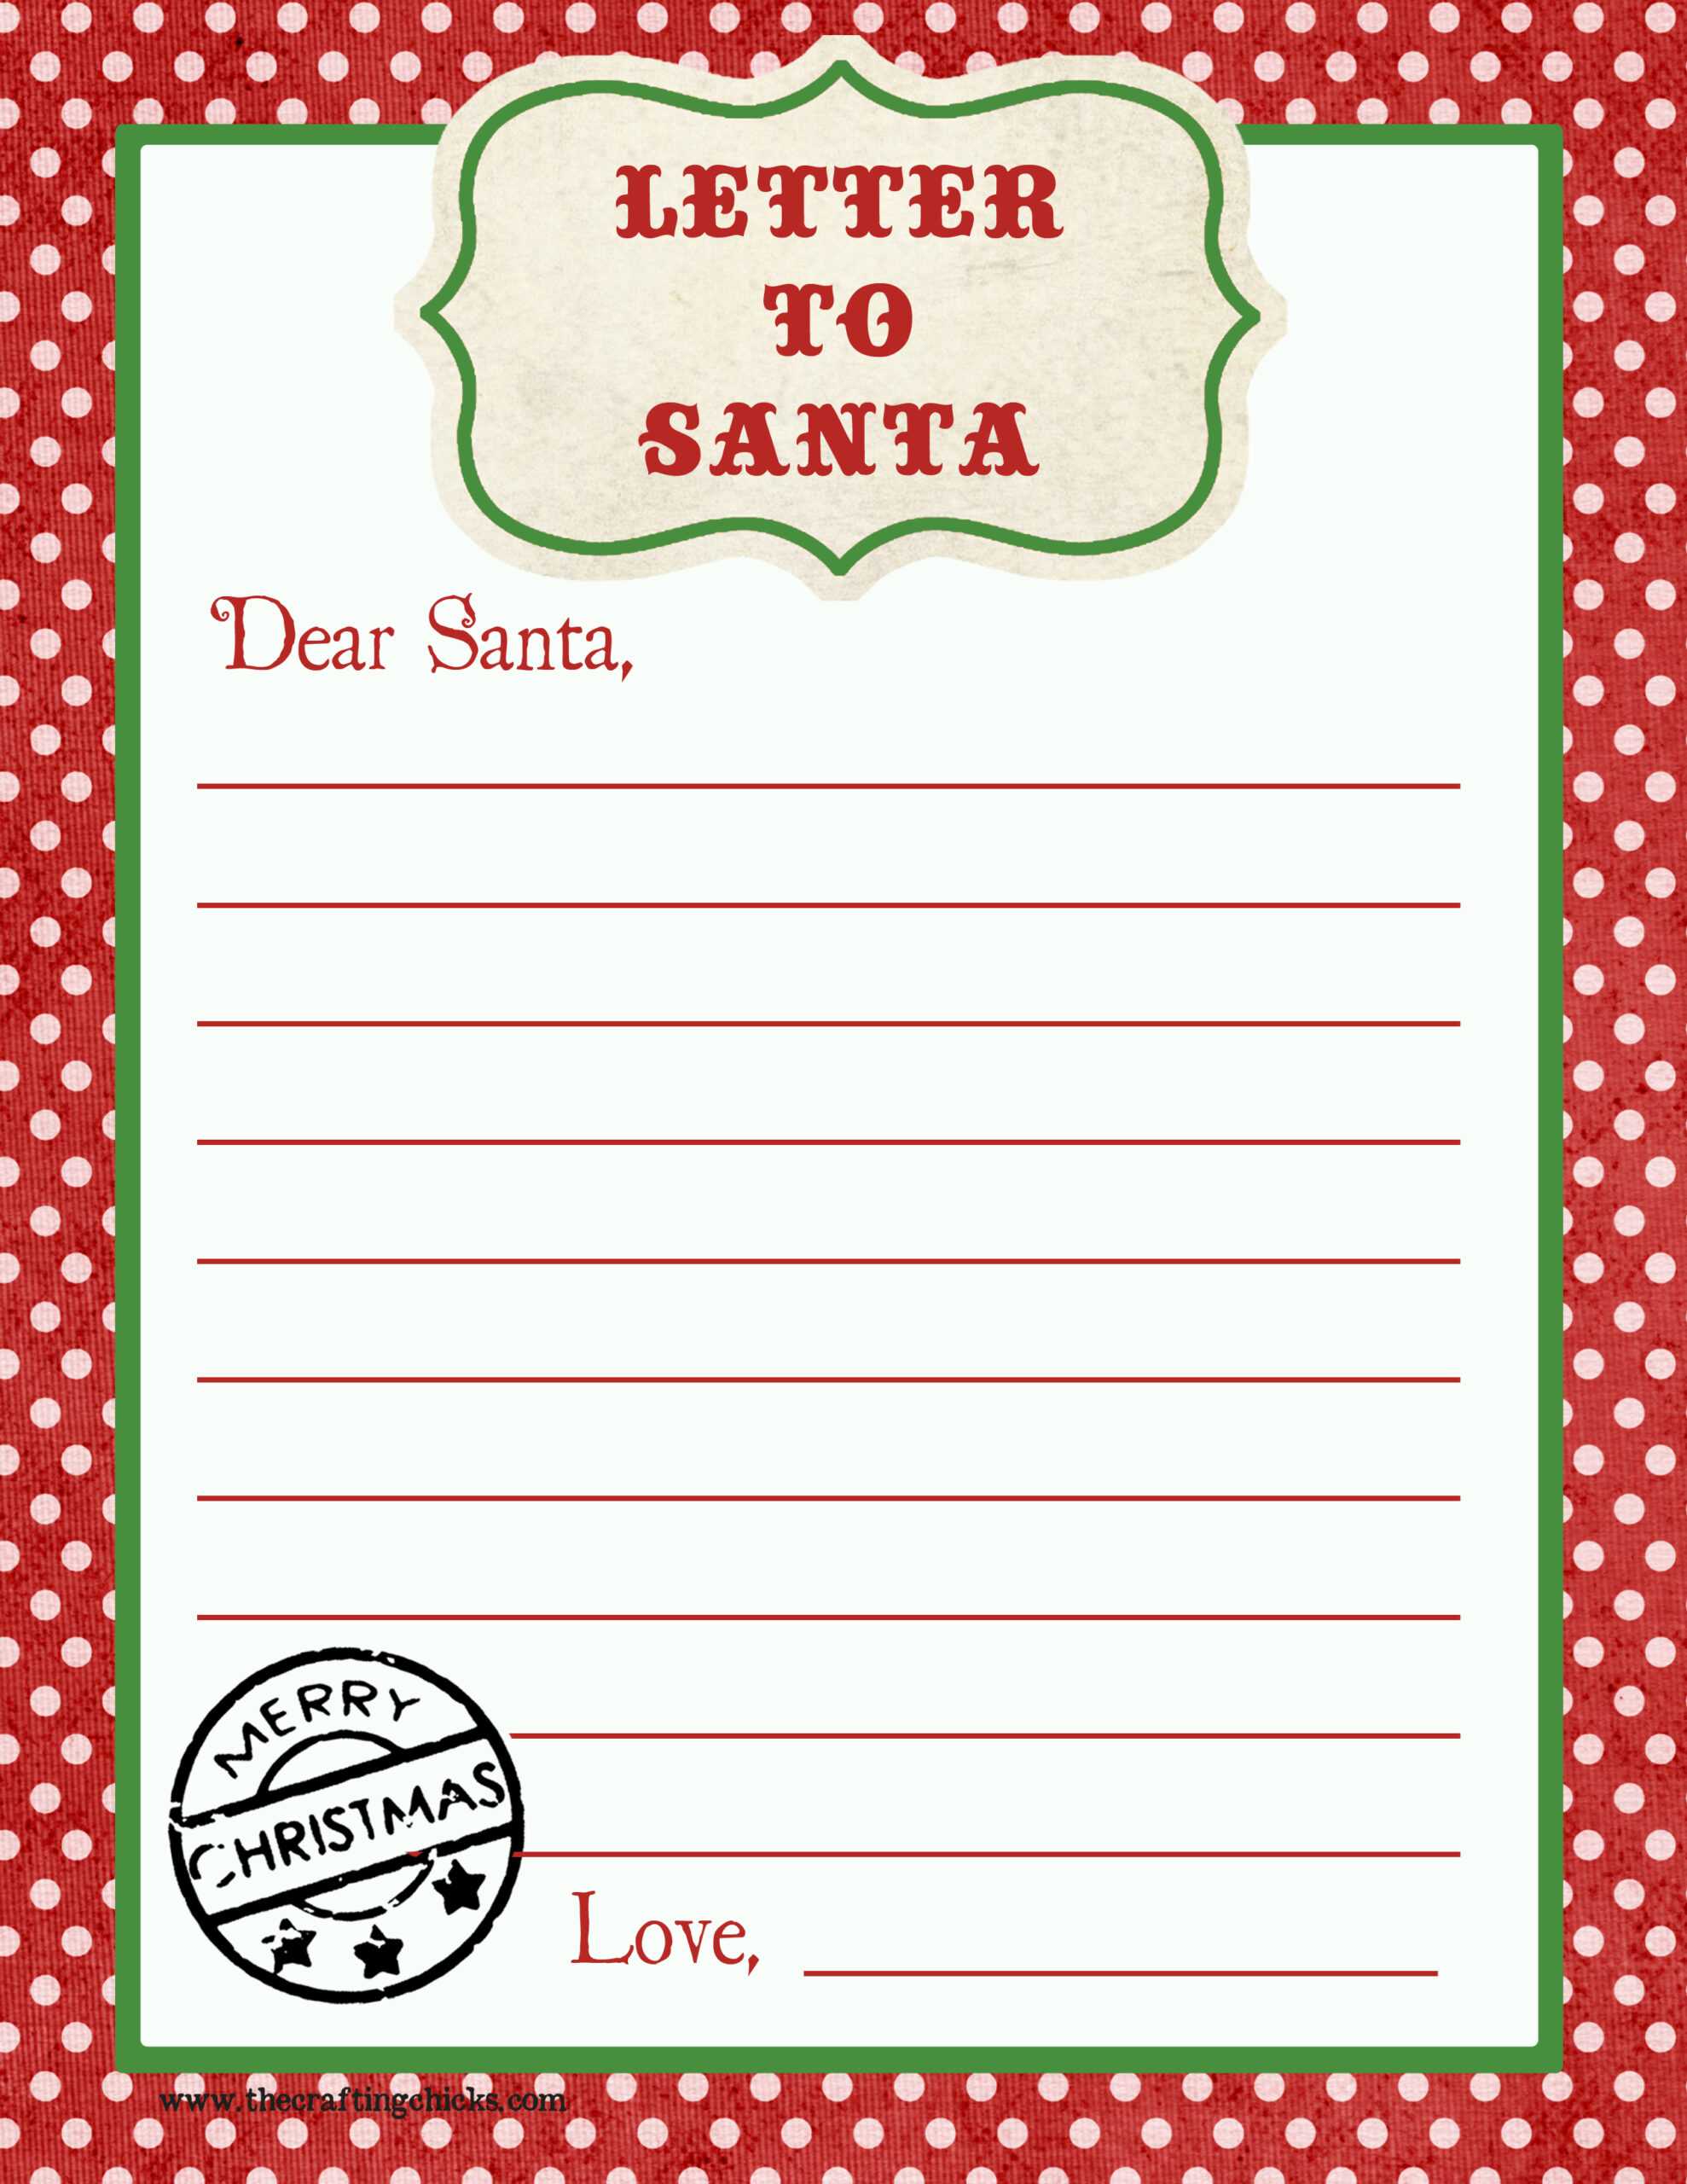 Letter To Santa Free Printable Download With Free Printable Letter From Santa Template